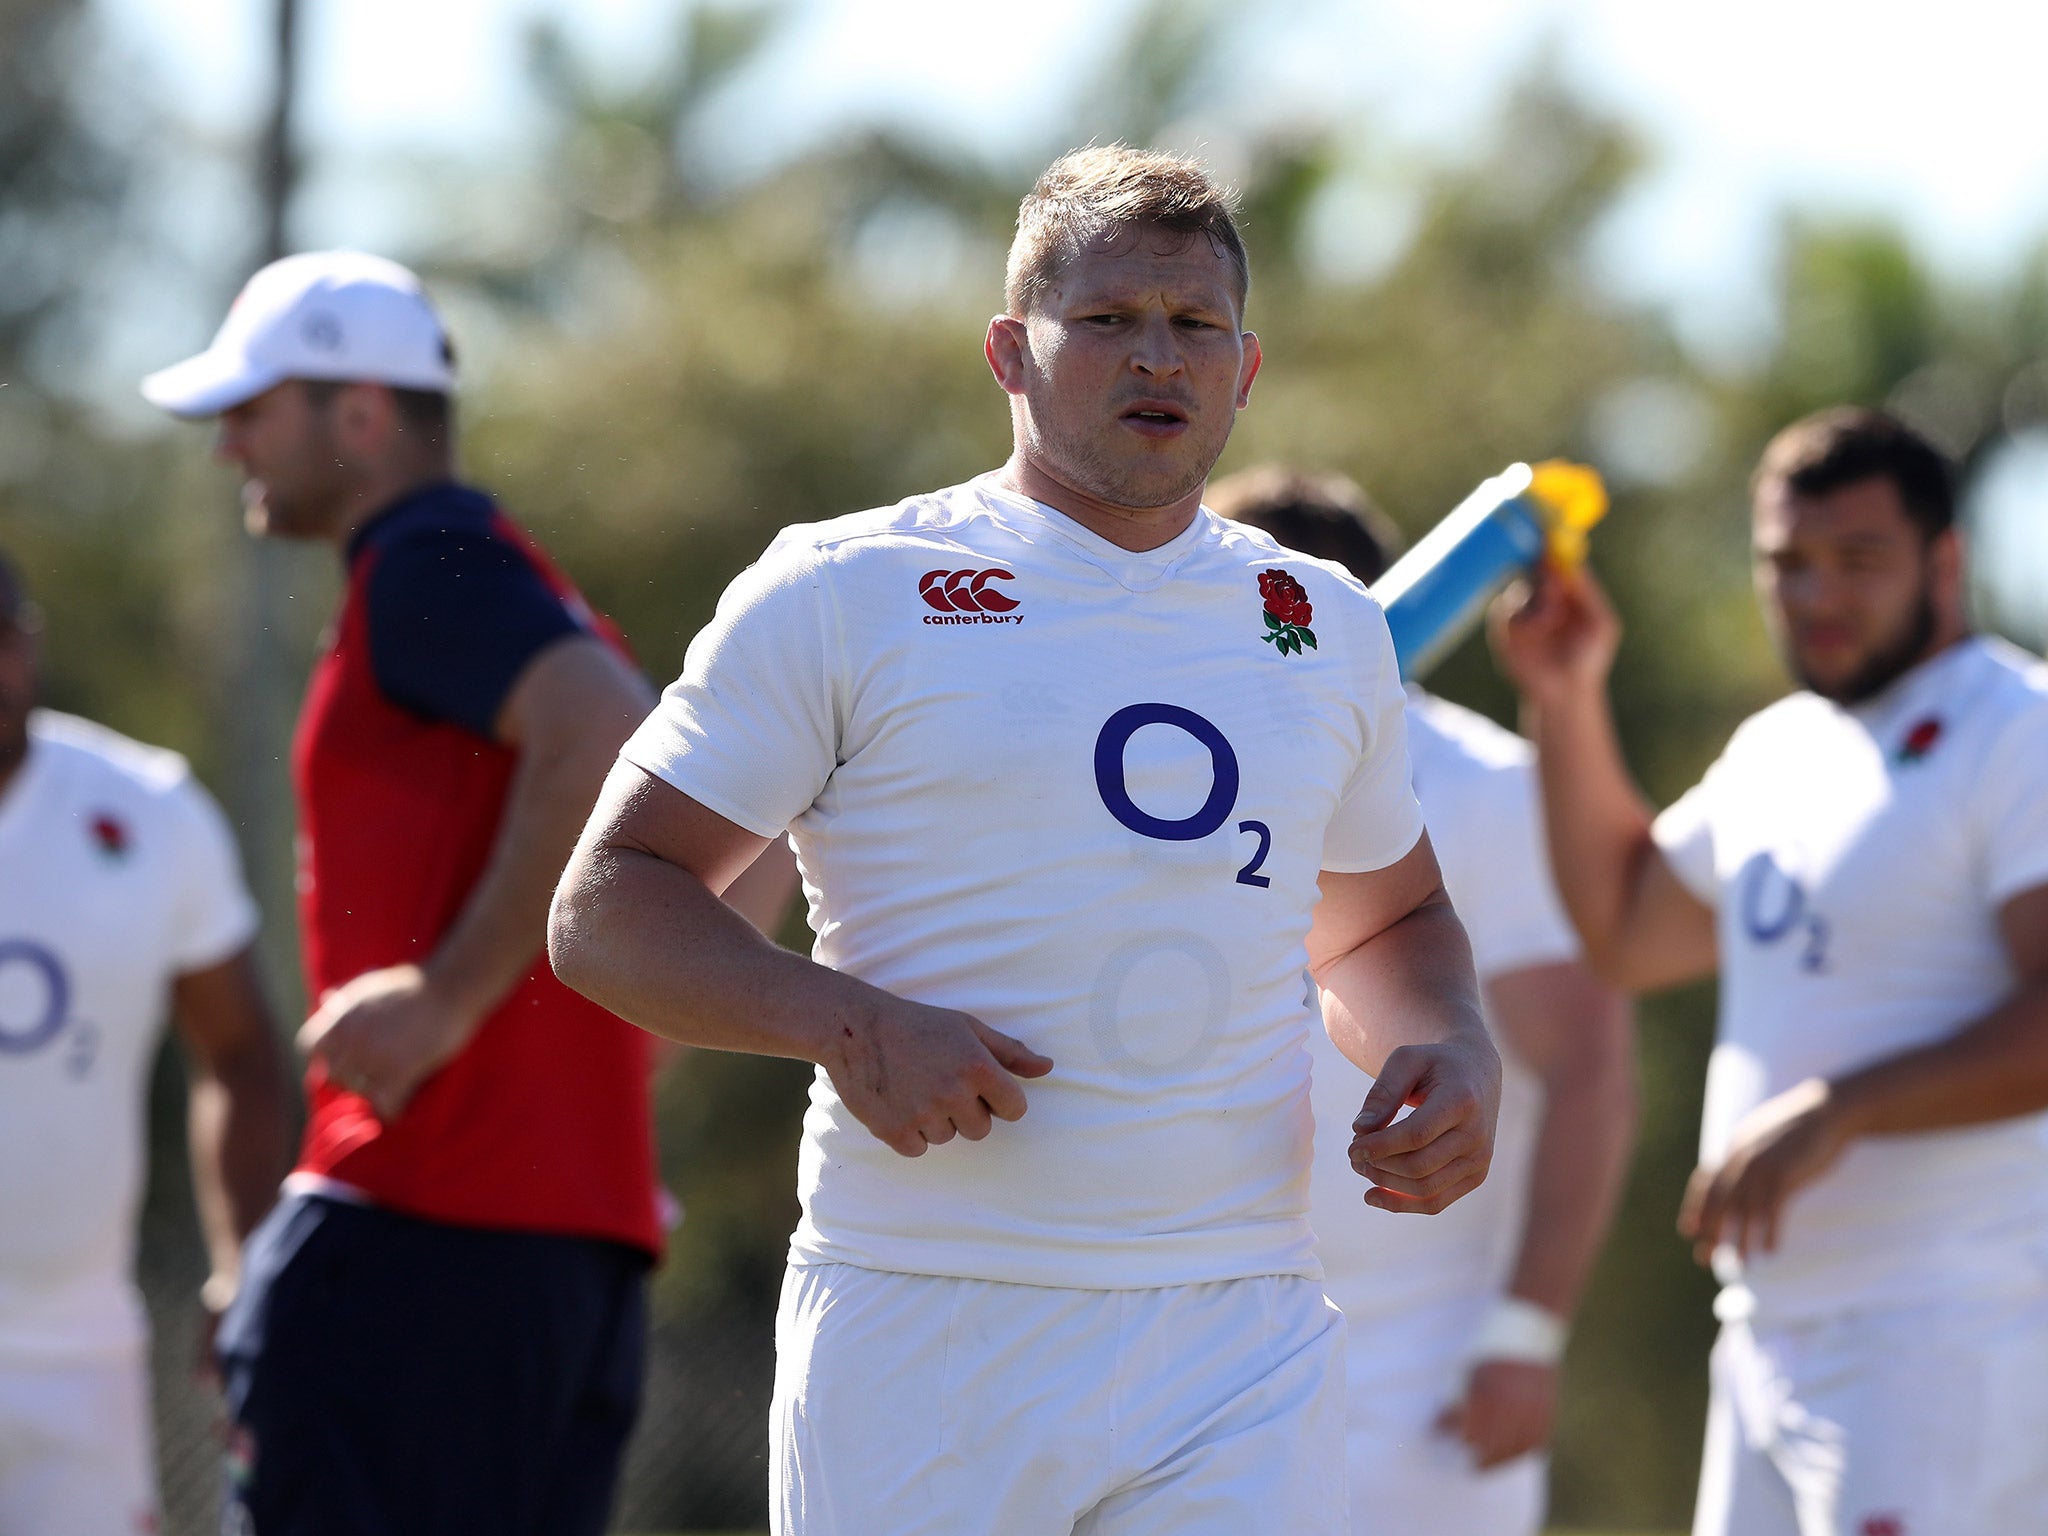 Dylan Hartley is one of the leading contenders to captain the Lions tour of New Zealand